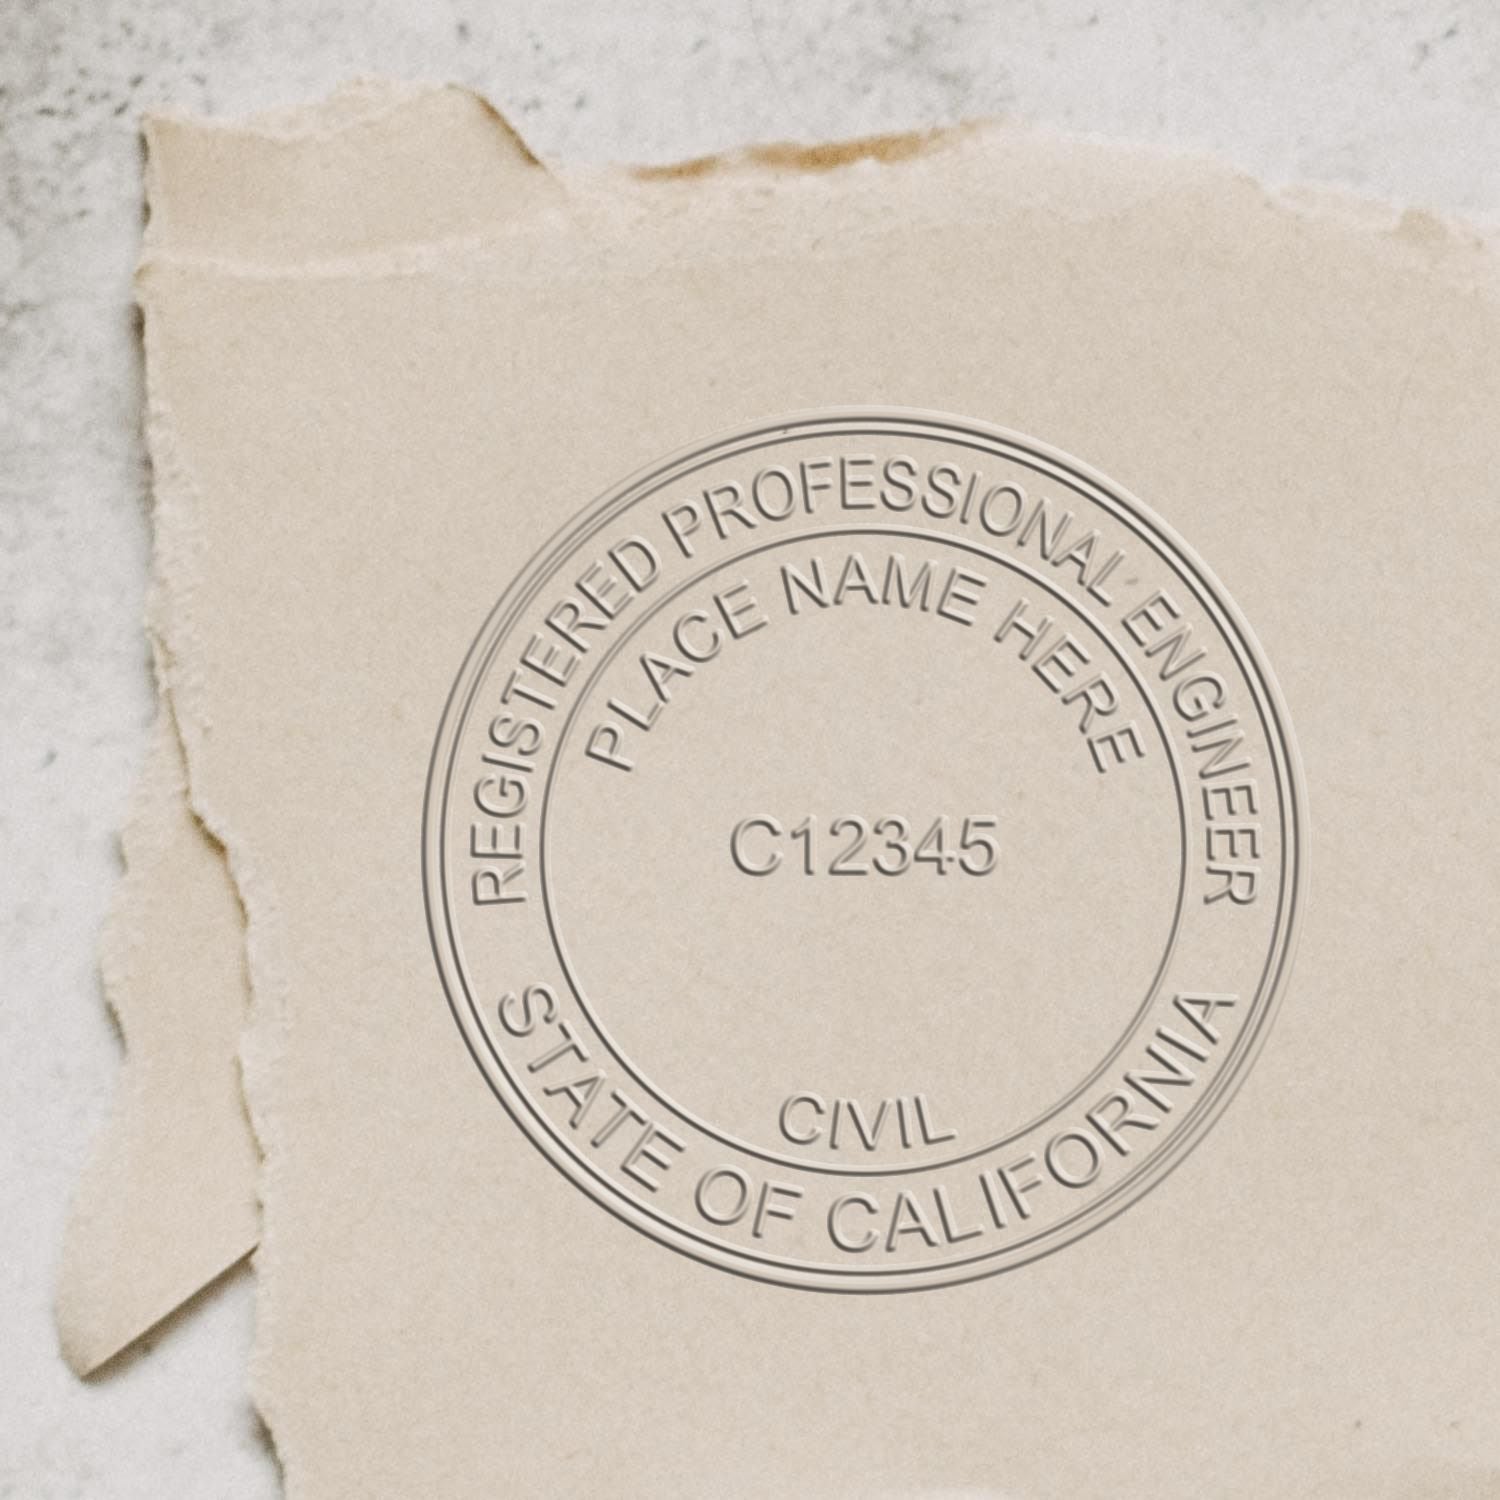 A stamped impression of the Soft California Professional Engineer Seal in this stylish lifestyle photo, setting the tone for a unique and personalized product.